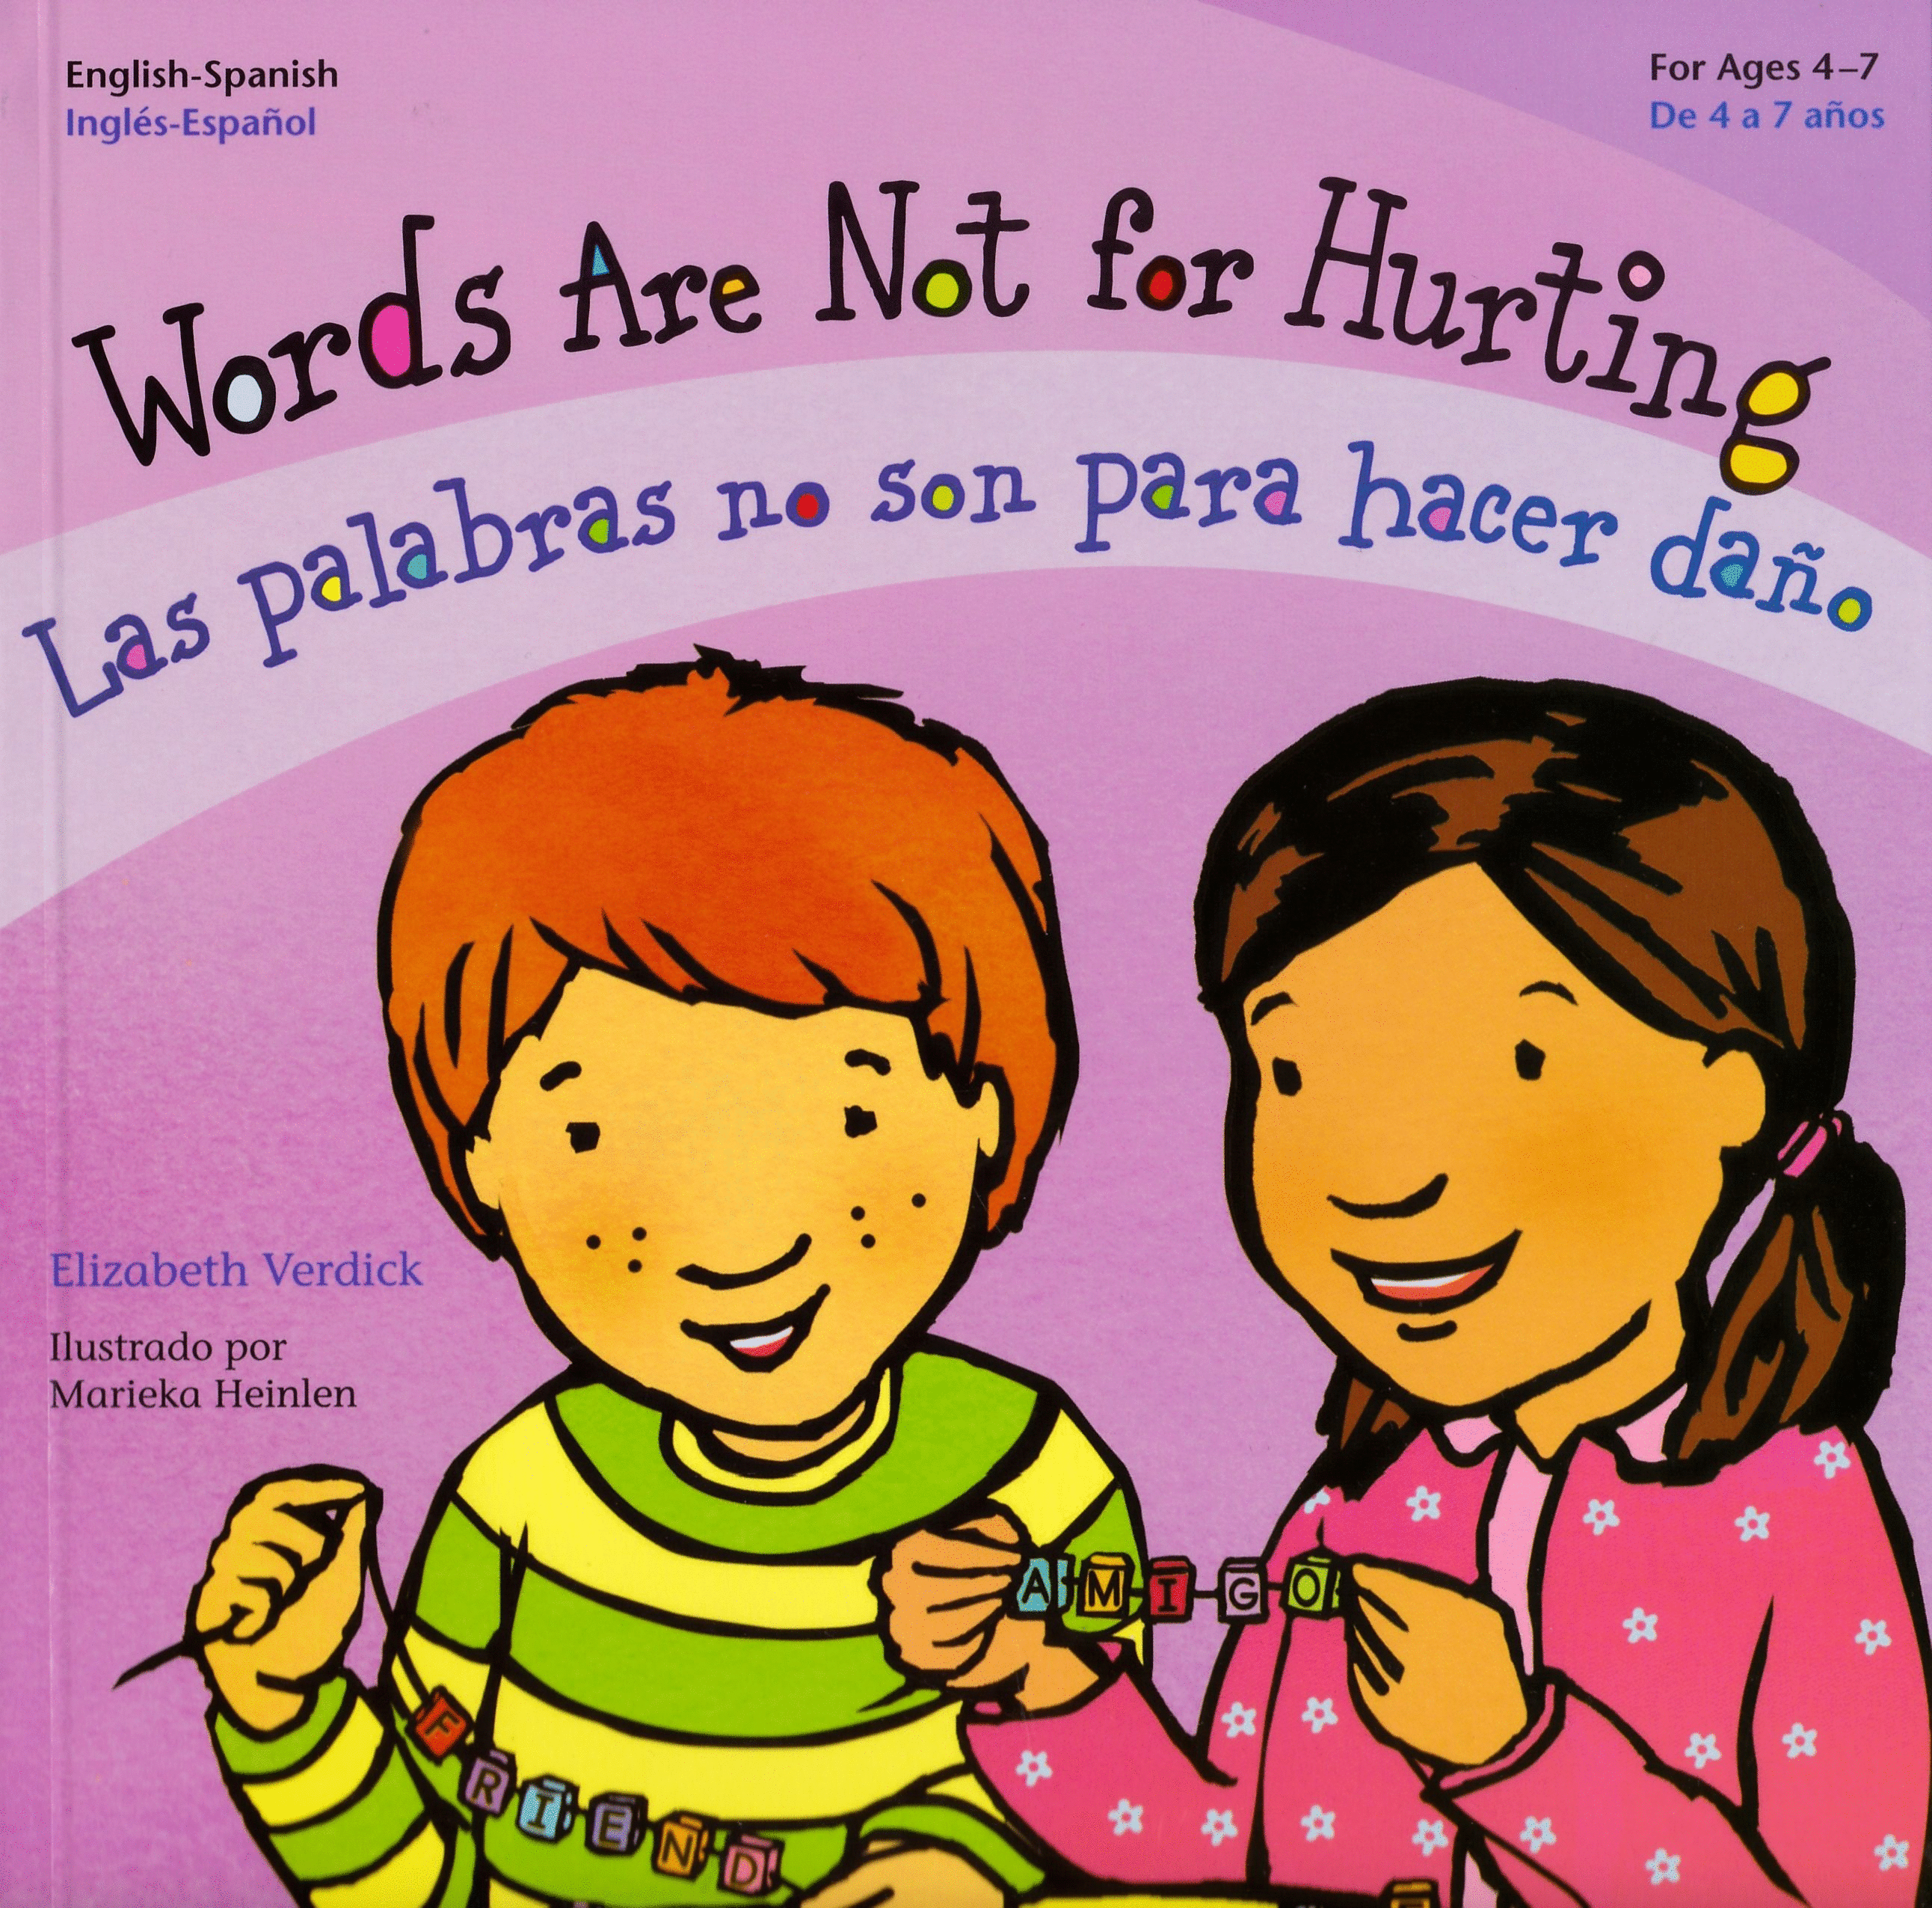 WORDS ARE NOT FOR HURTING. LAS PALABRAS NO SON PARA HACER DAÑO